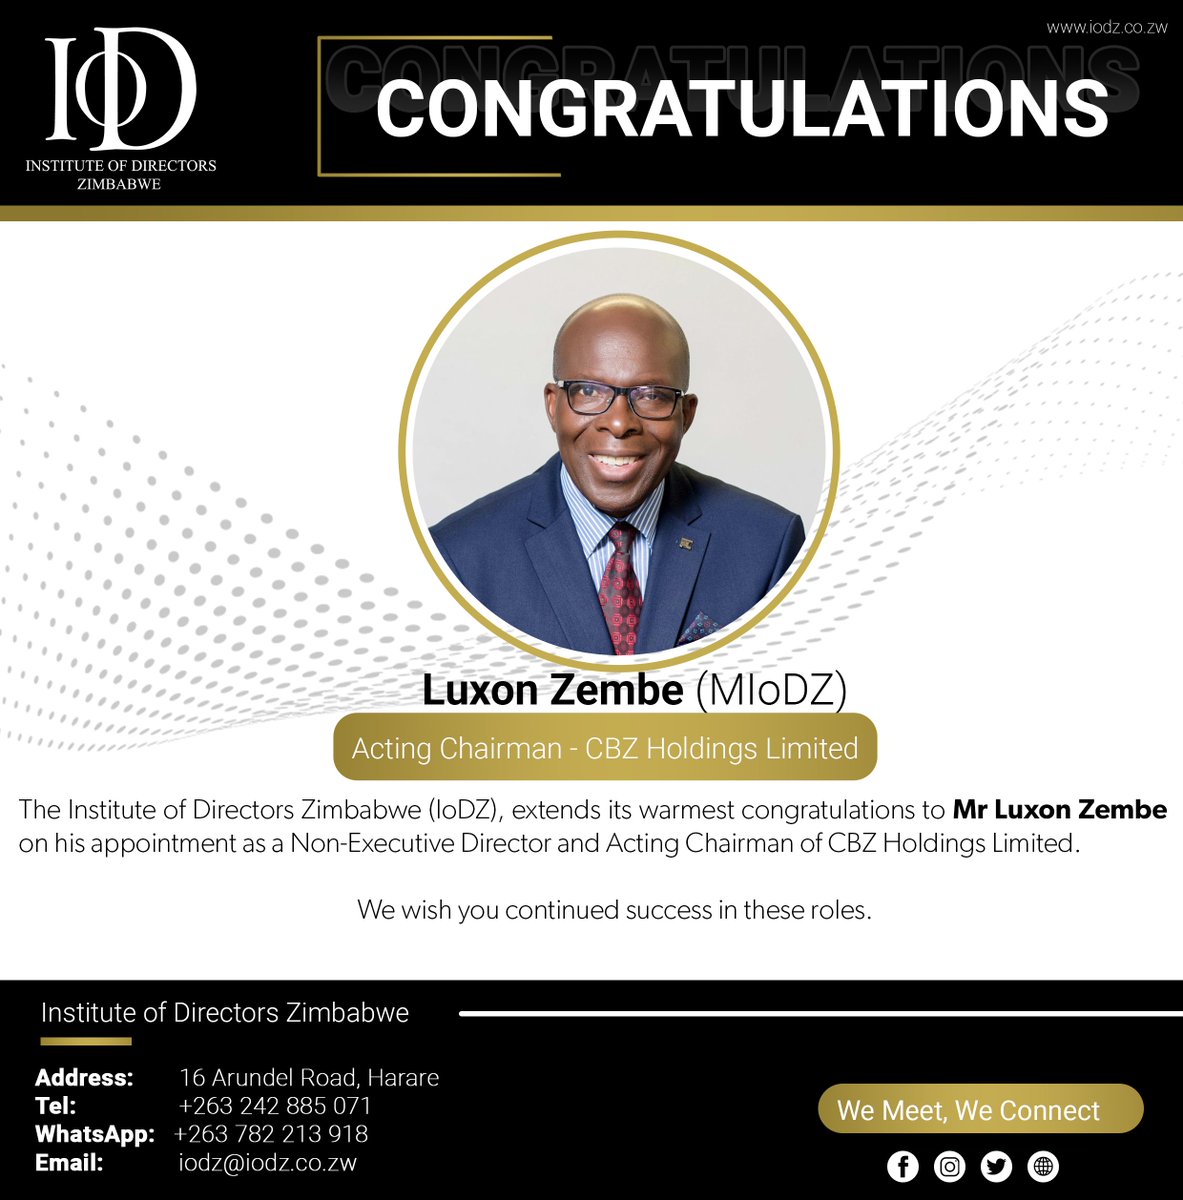 Congratulations to Mr Luxon Zembe on his appointments as a Non-Executive Director and Acting Chairman for CBZ Holdings Limited. Your exceptional skills, experience, and leadership have earned you these prestigious roles.